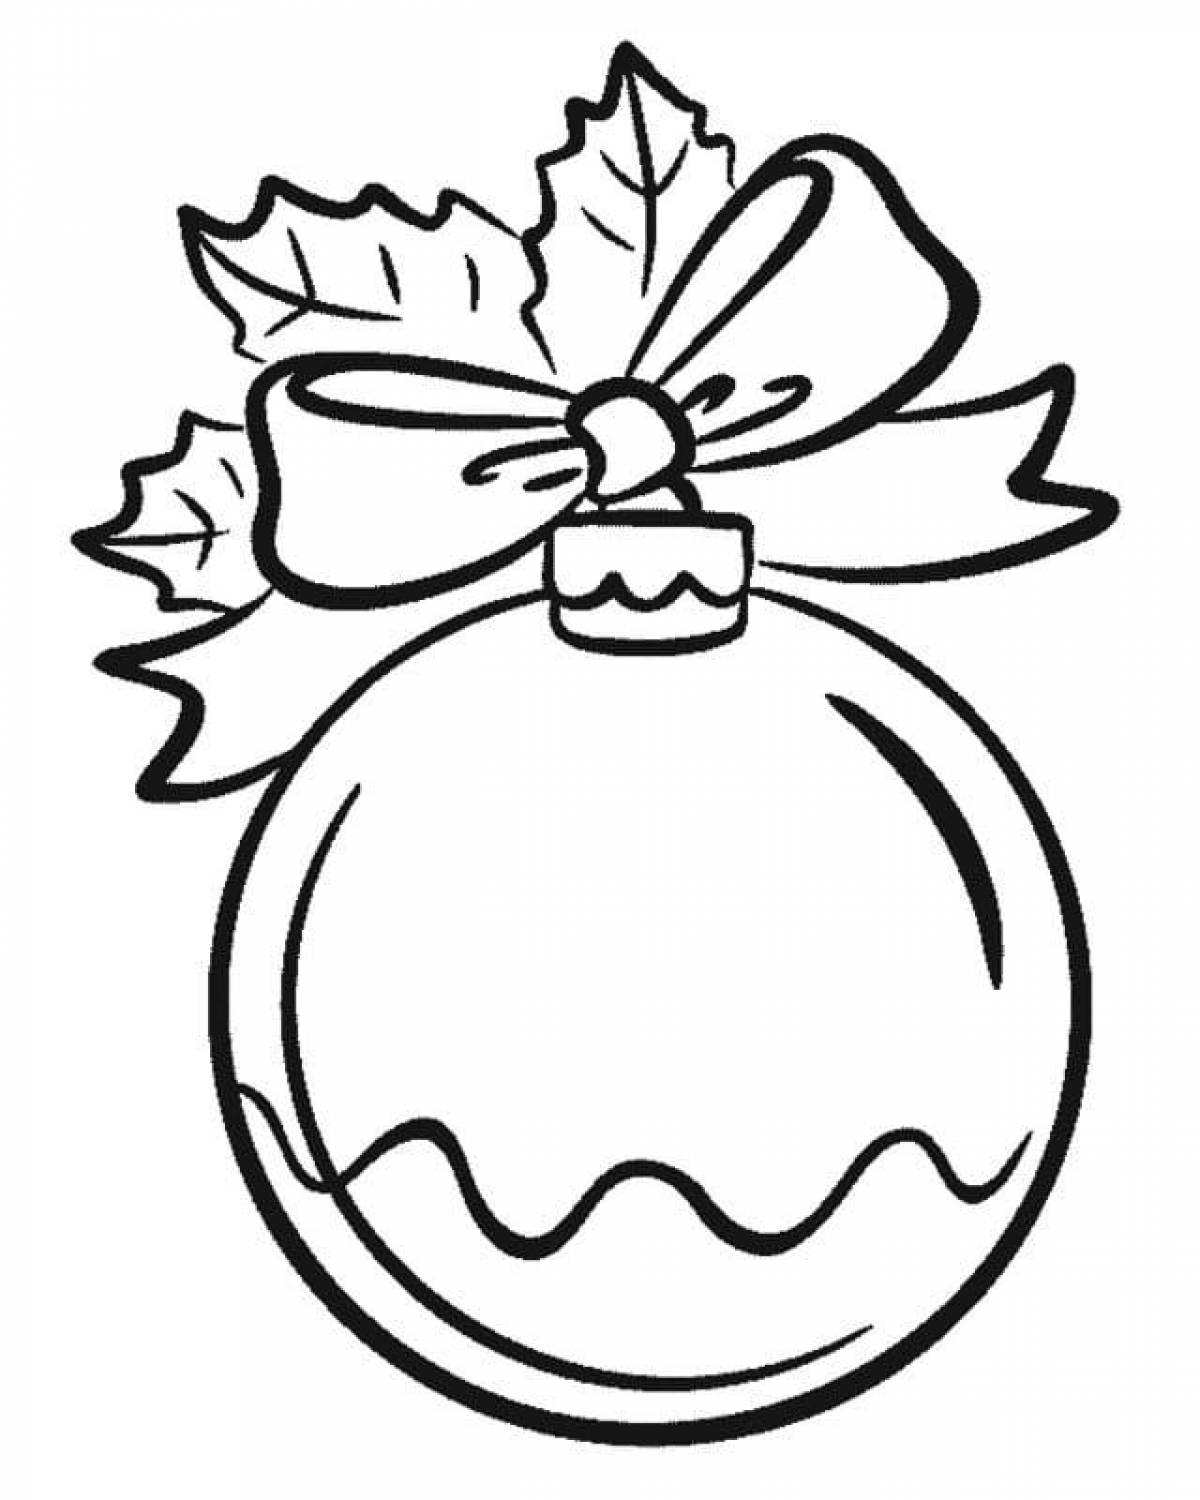 Decorated Christmas ball coloring book